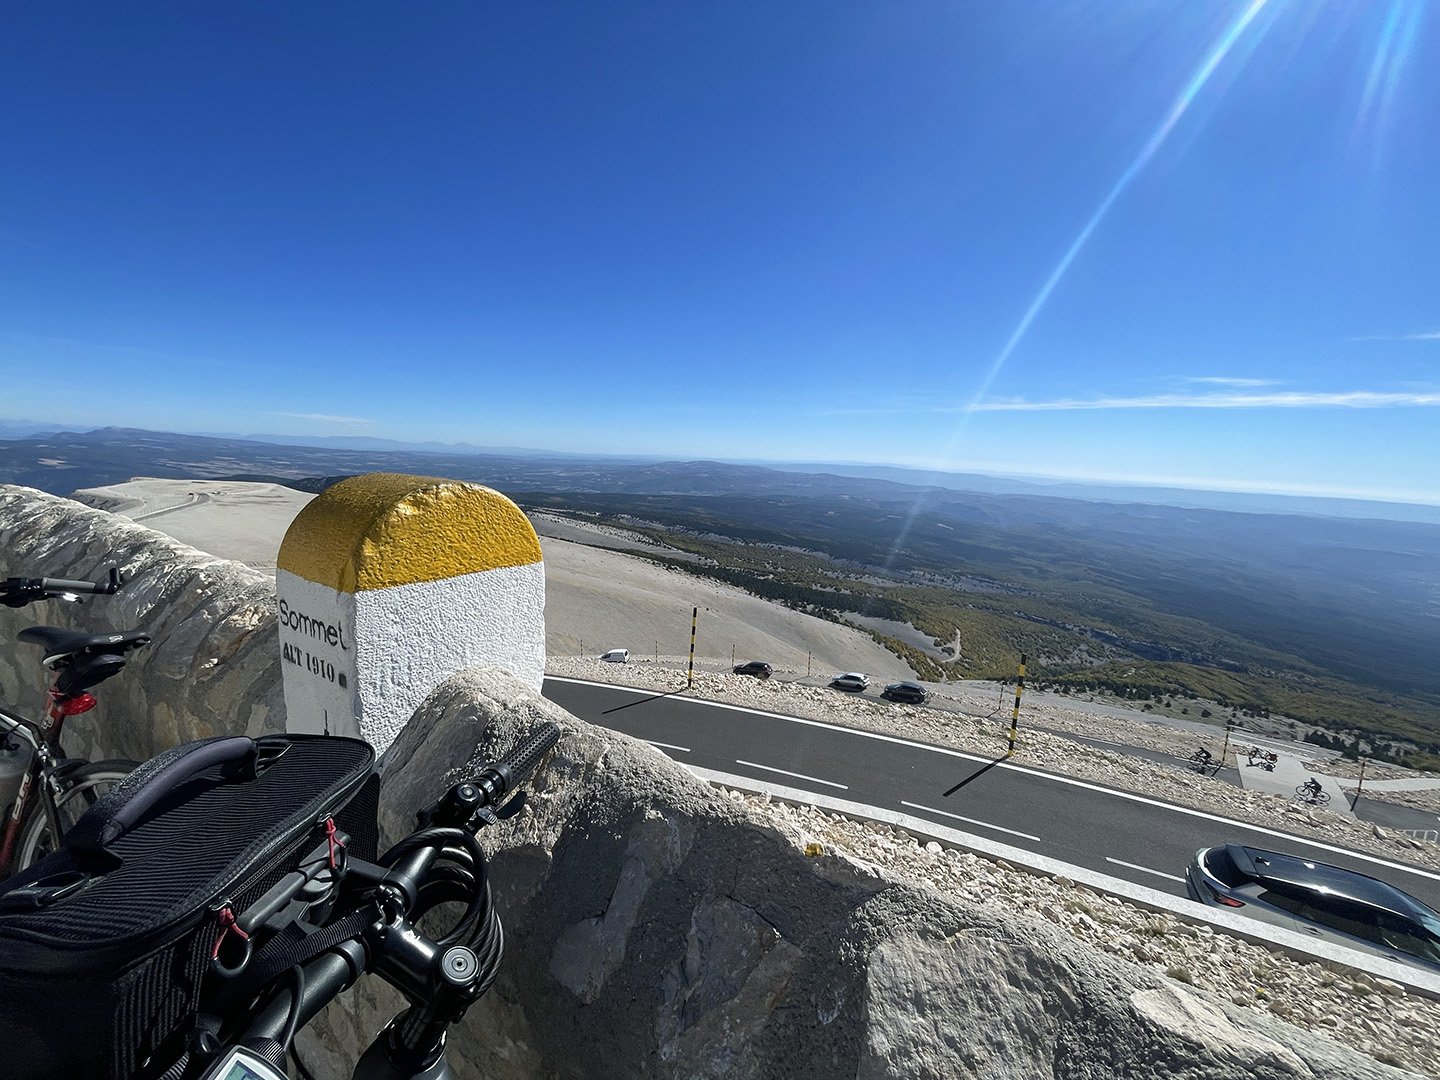 The view from the summit of Mont Ventoux.